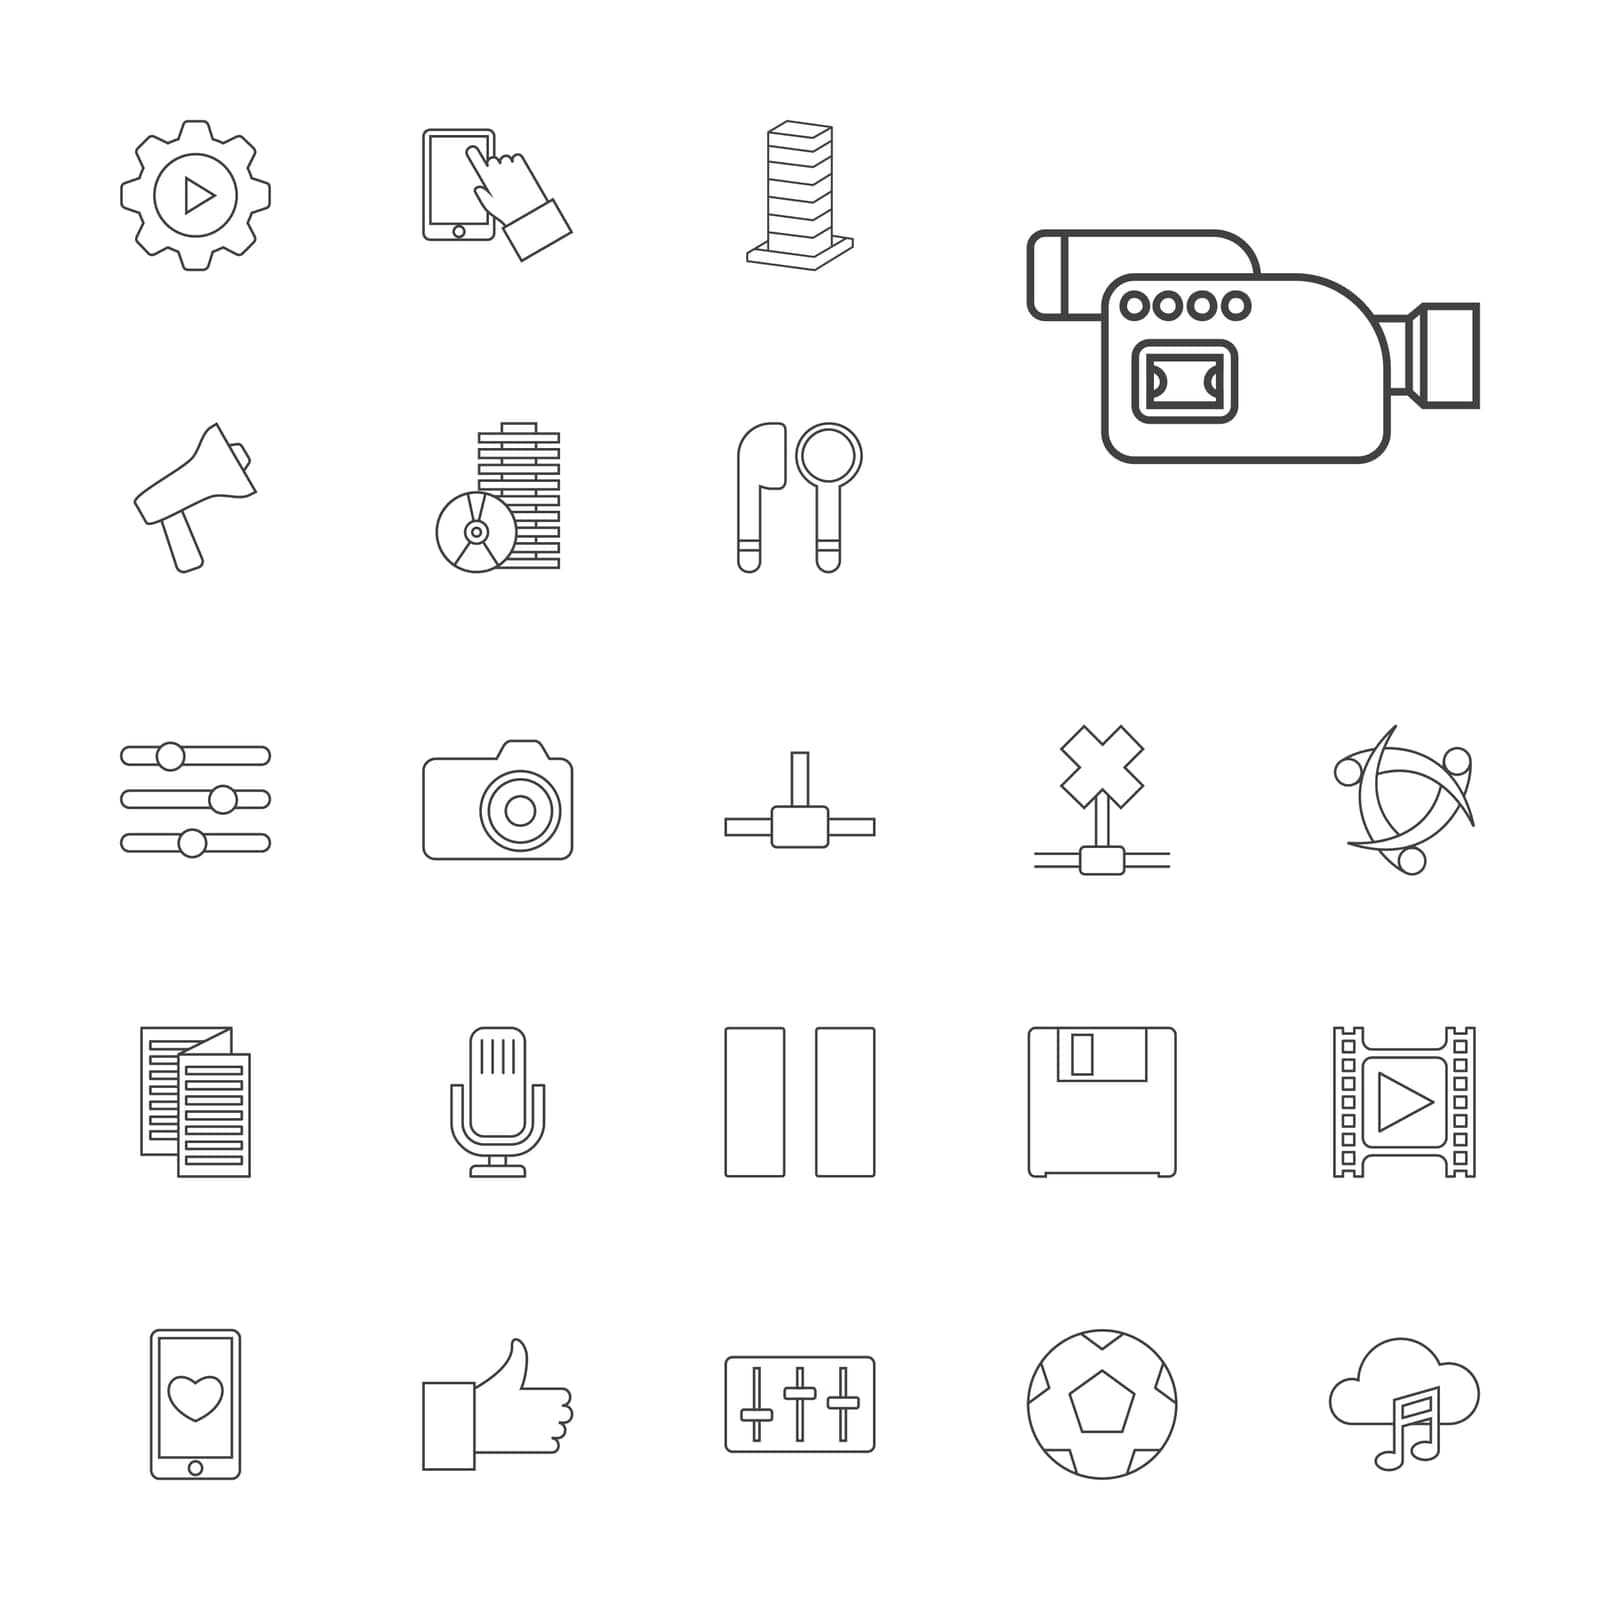 play,symbol,slider,movie,thumb,concept,icon,sign,isolated,diskette,media,building,network,cloud,music,white,tape,web,design,connection,vector,up,camera,communication,microphone,sliders,digital,news,set,business,in,center,mobile,touchscreen,technology,heart,pause,volume,background,disc,illustration,internet,gear by ogqcorp